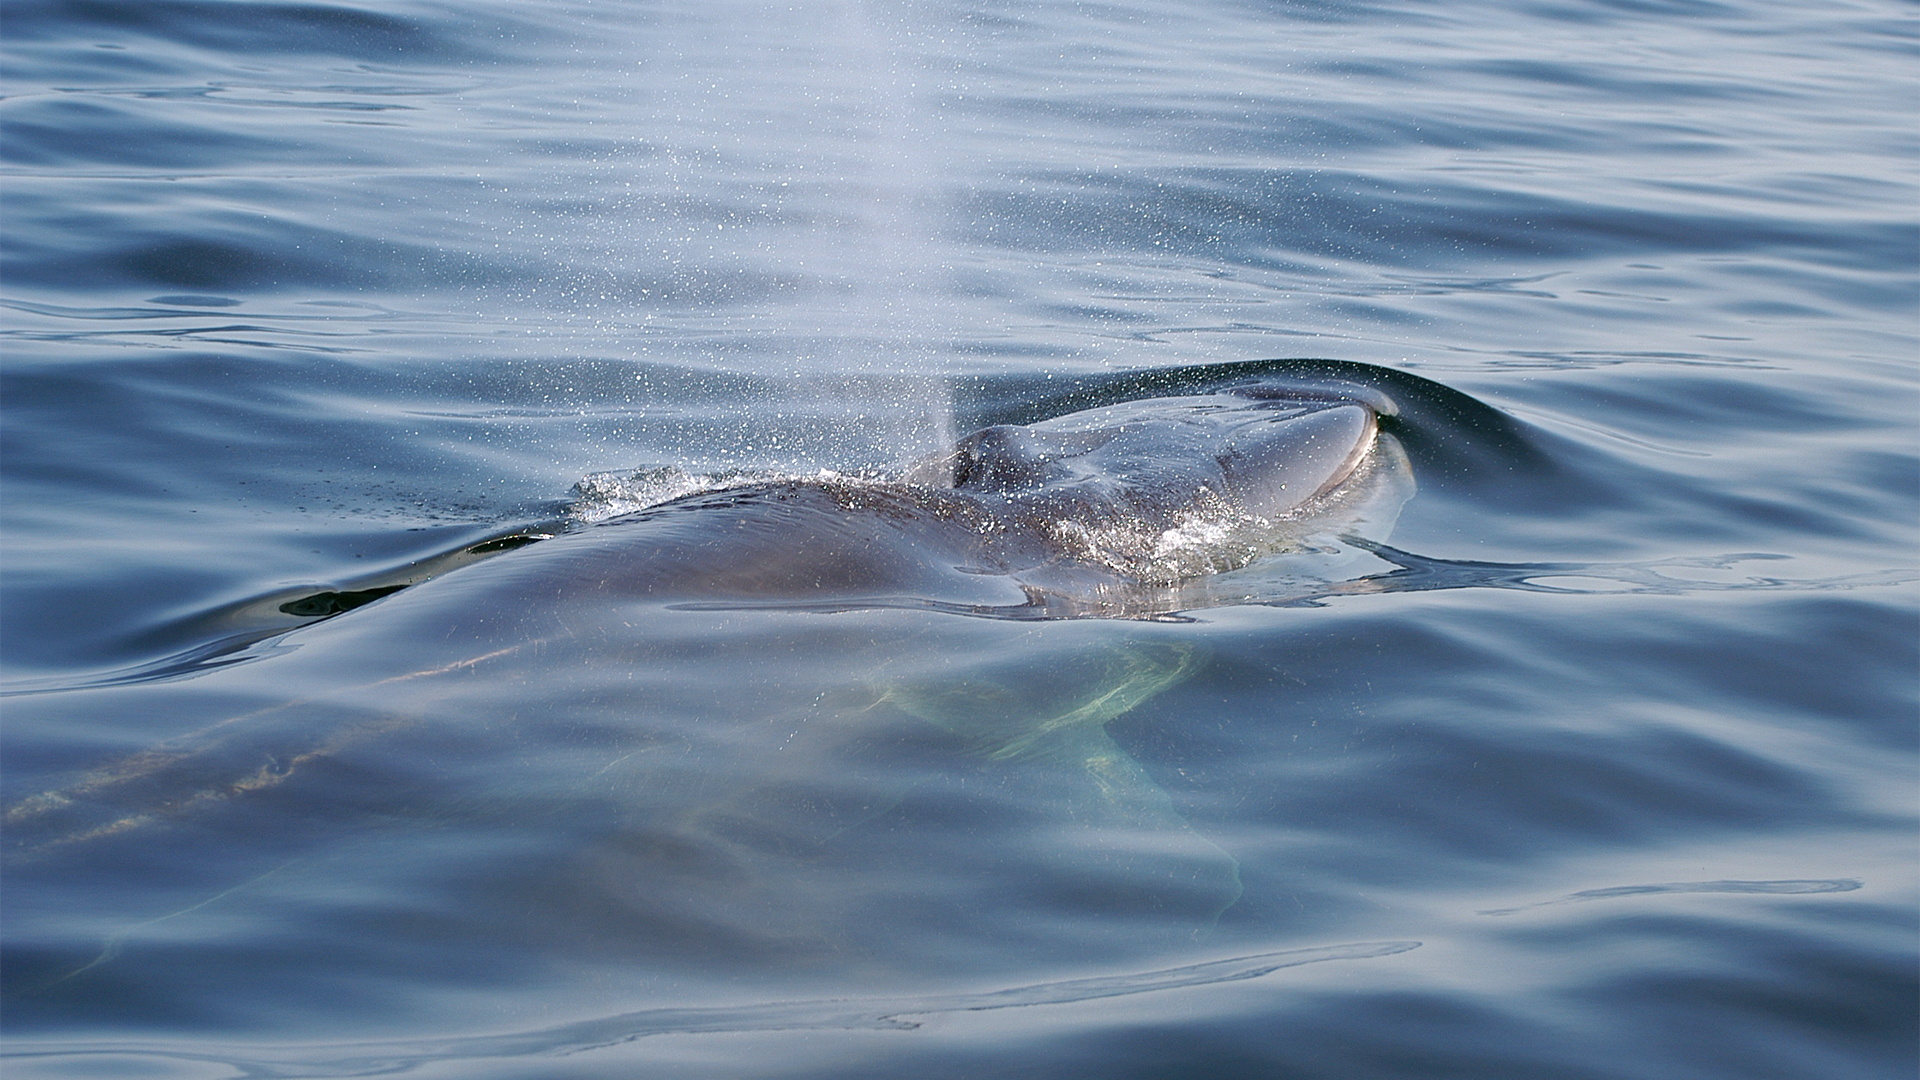 The top of the head and the front of the back of a fin whale pierce the water surface as the animal prepares to take a breath. Its exhalation is visible and part of its body can be seen through the clear water.